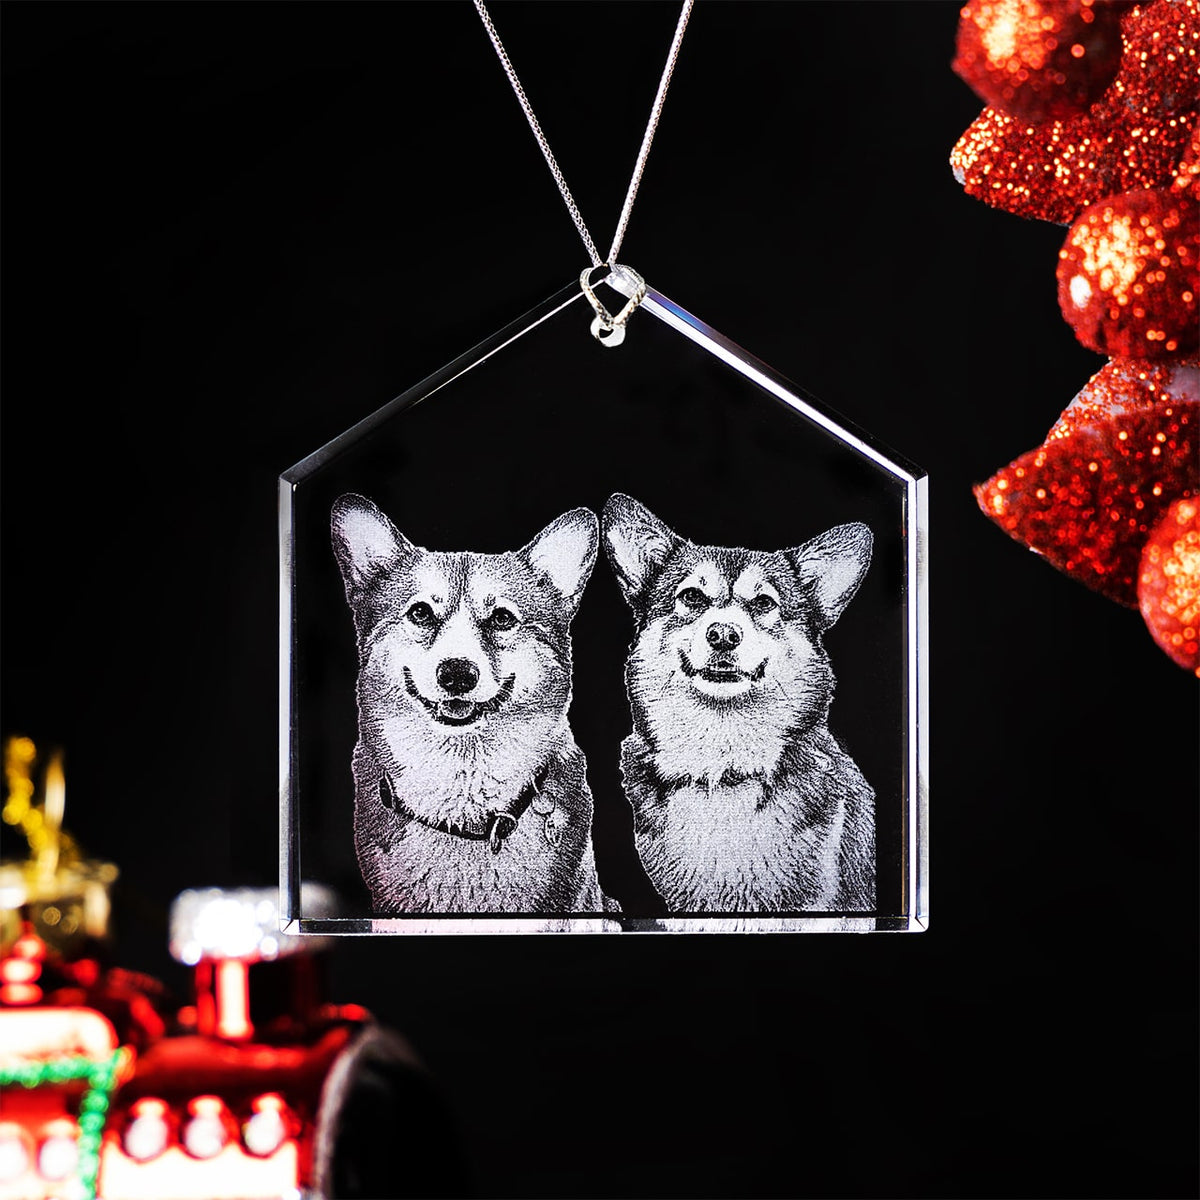 Crystal Ornament House | 3D Laser Gifts